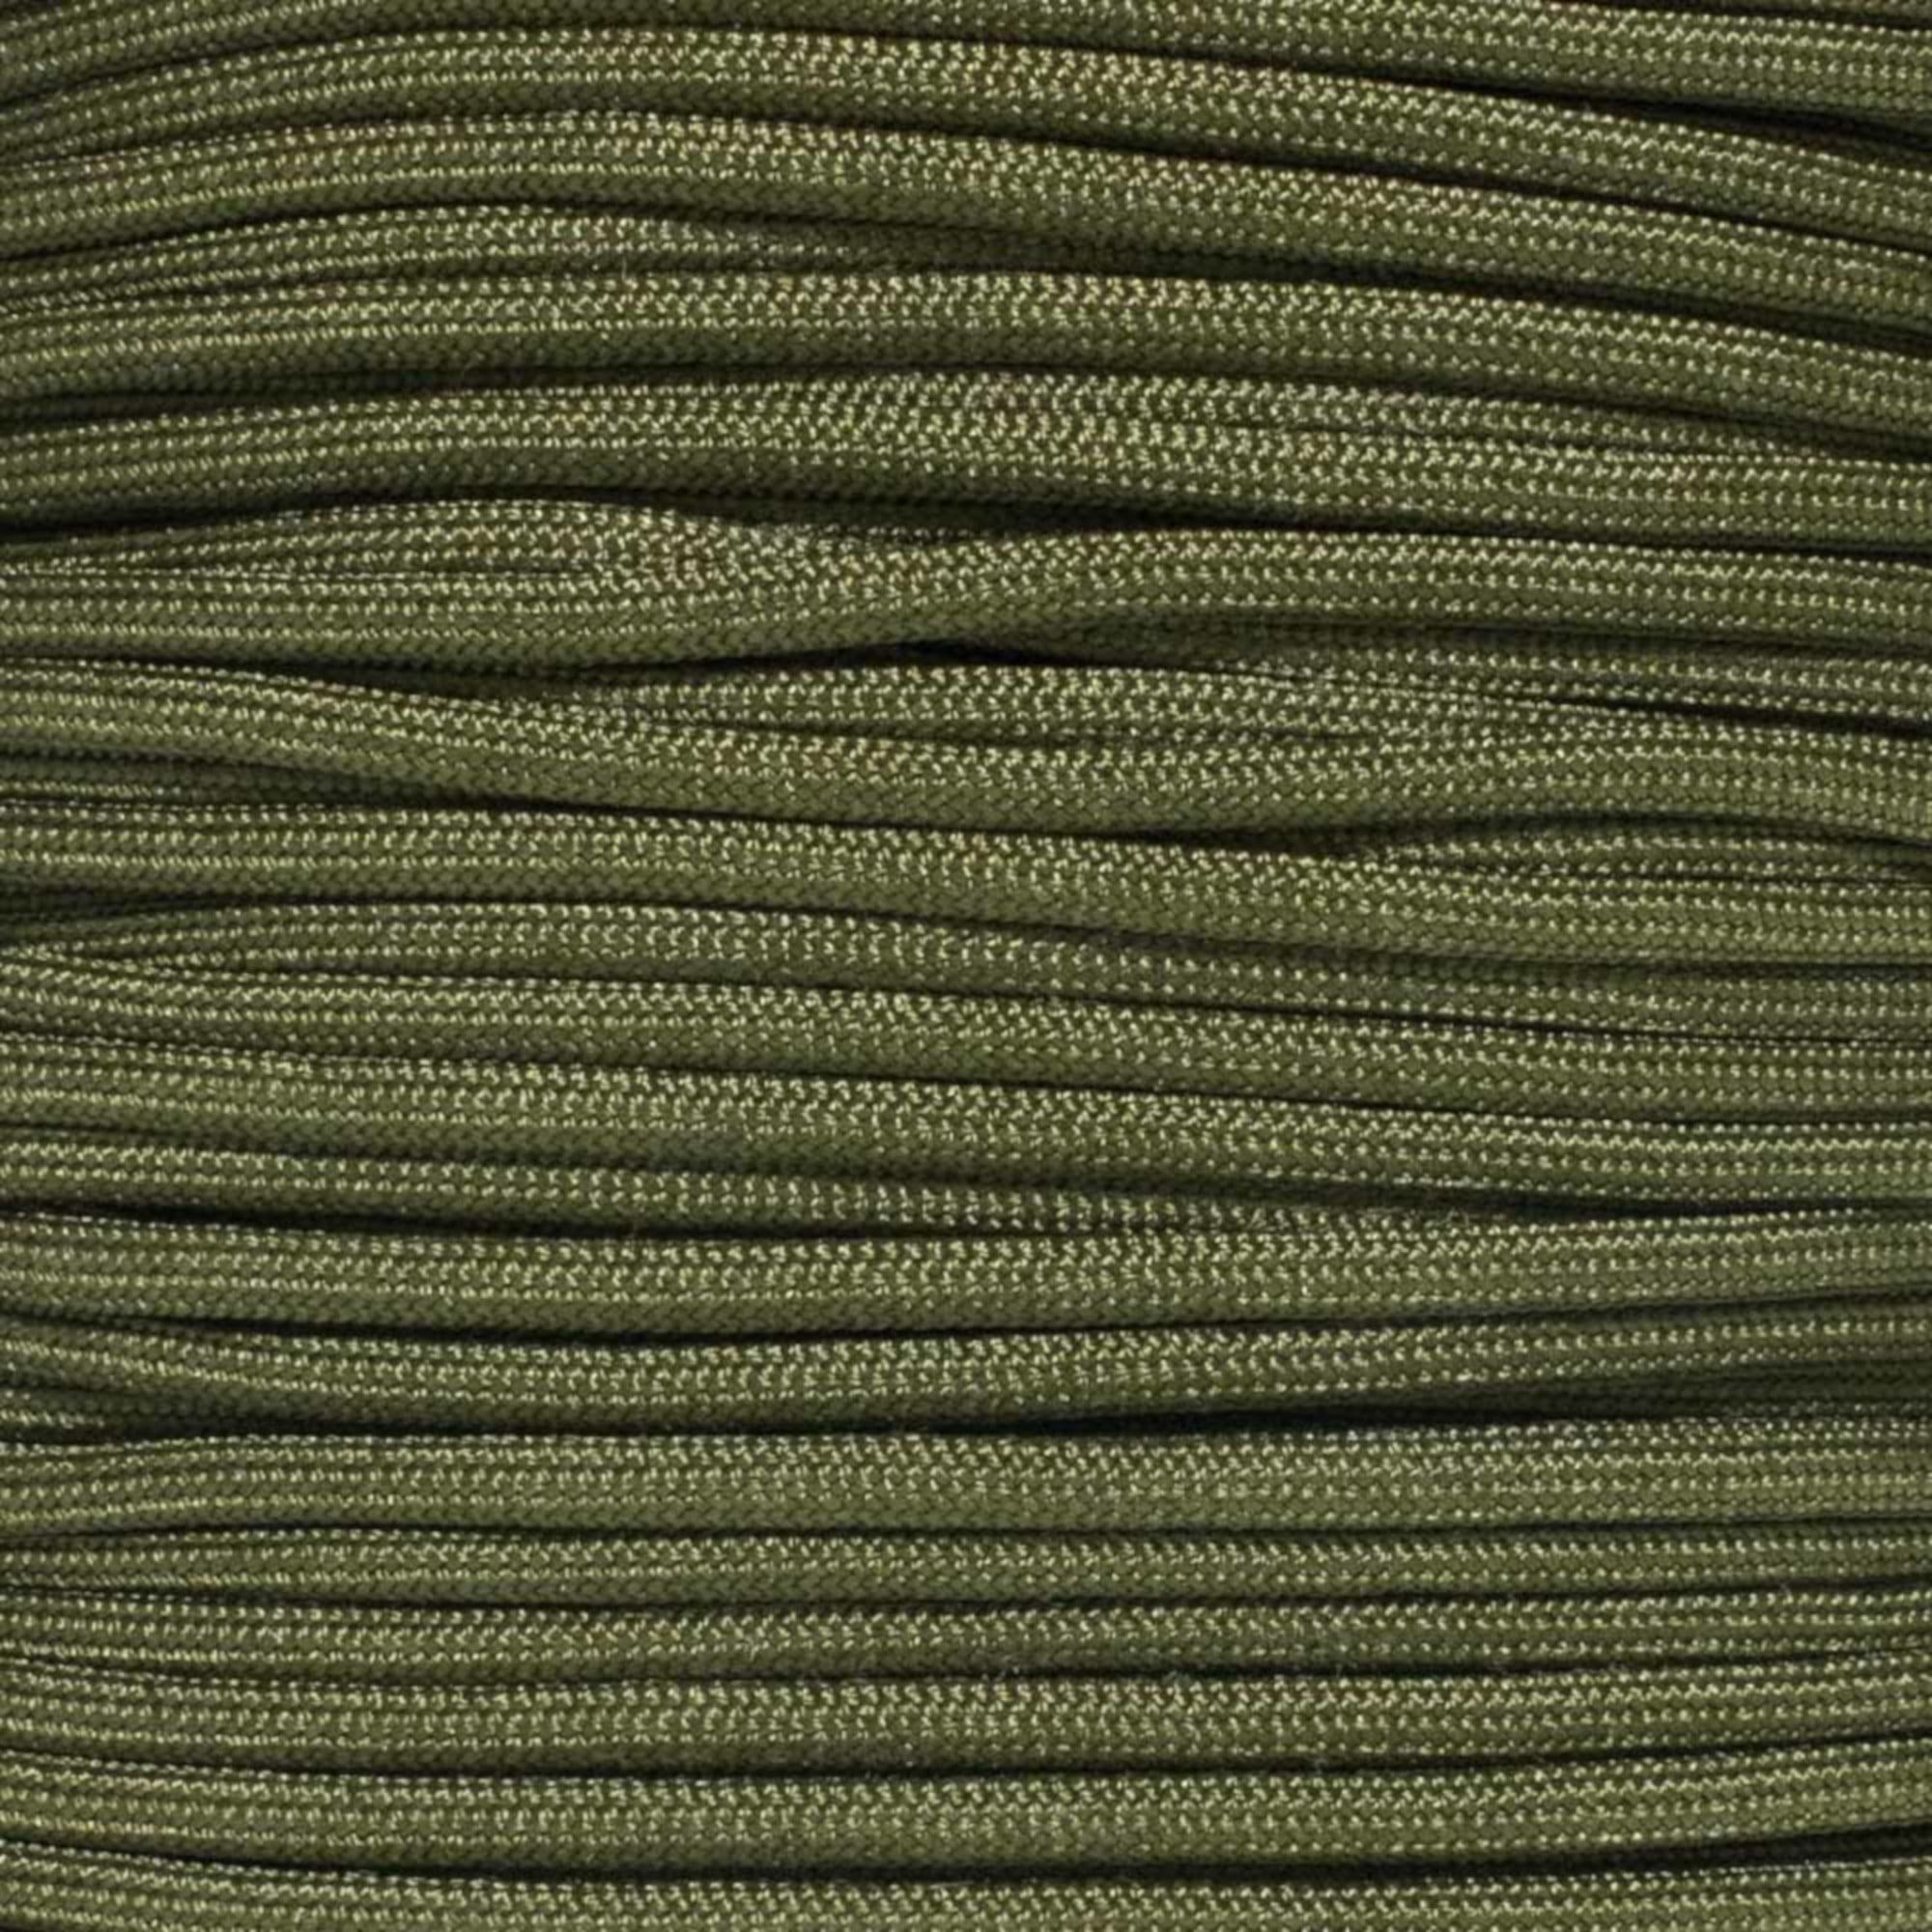 Mil Spec Paracord MIL-C-5040H Type III Built for Survival Titanium Series  made with Genuine Authentic 7 Strand 550 LB True 550 Military Specification  Strength Nylon Kernmantle Tactical Parachute Cord - Walmart.com